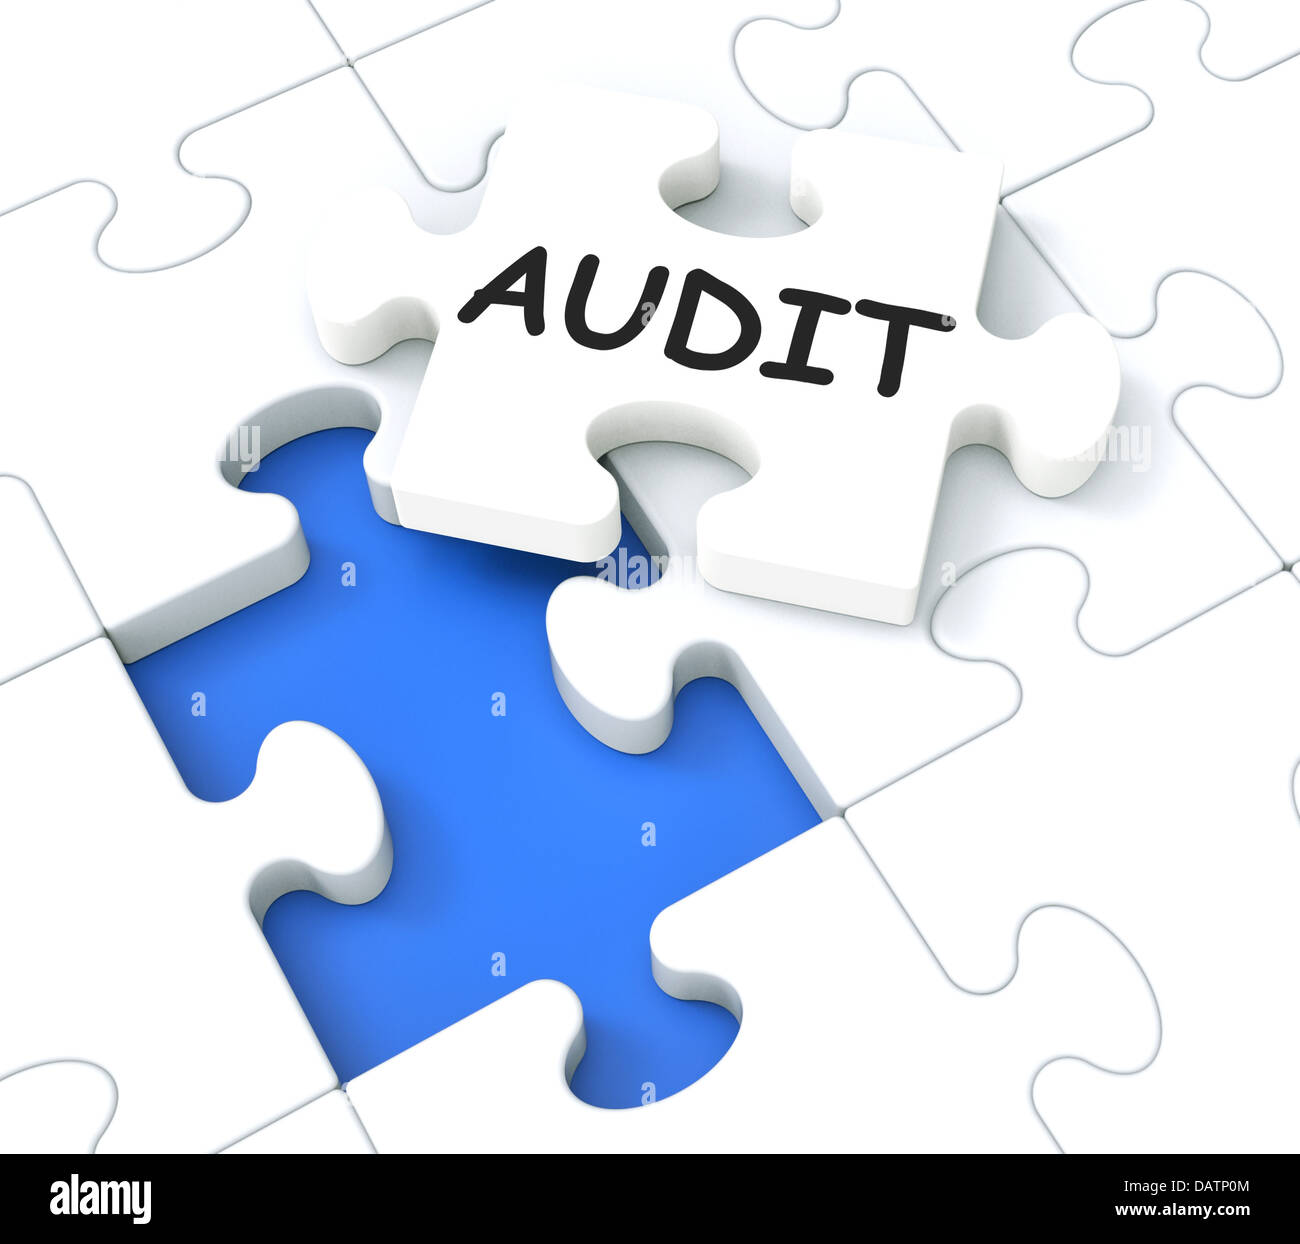 Audit Puzzle Shows Auditing And Reports Stock Photo